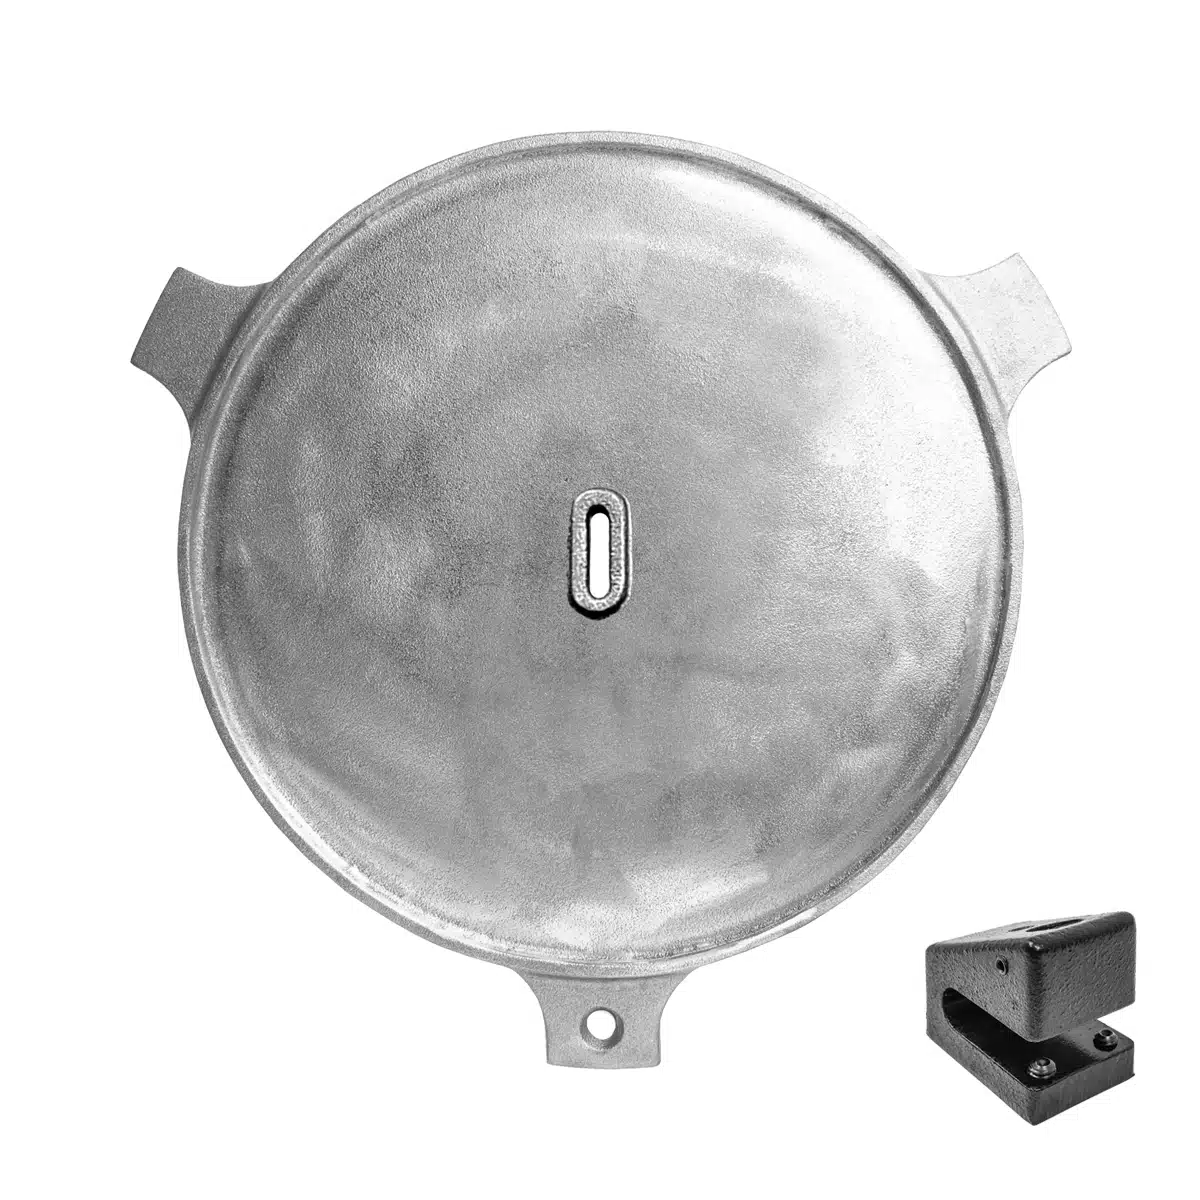 Goldens' Cast Iron Fire Pit Cooking System Large 20.5″ Searing Plate and Base